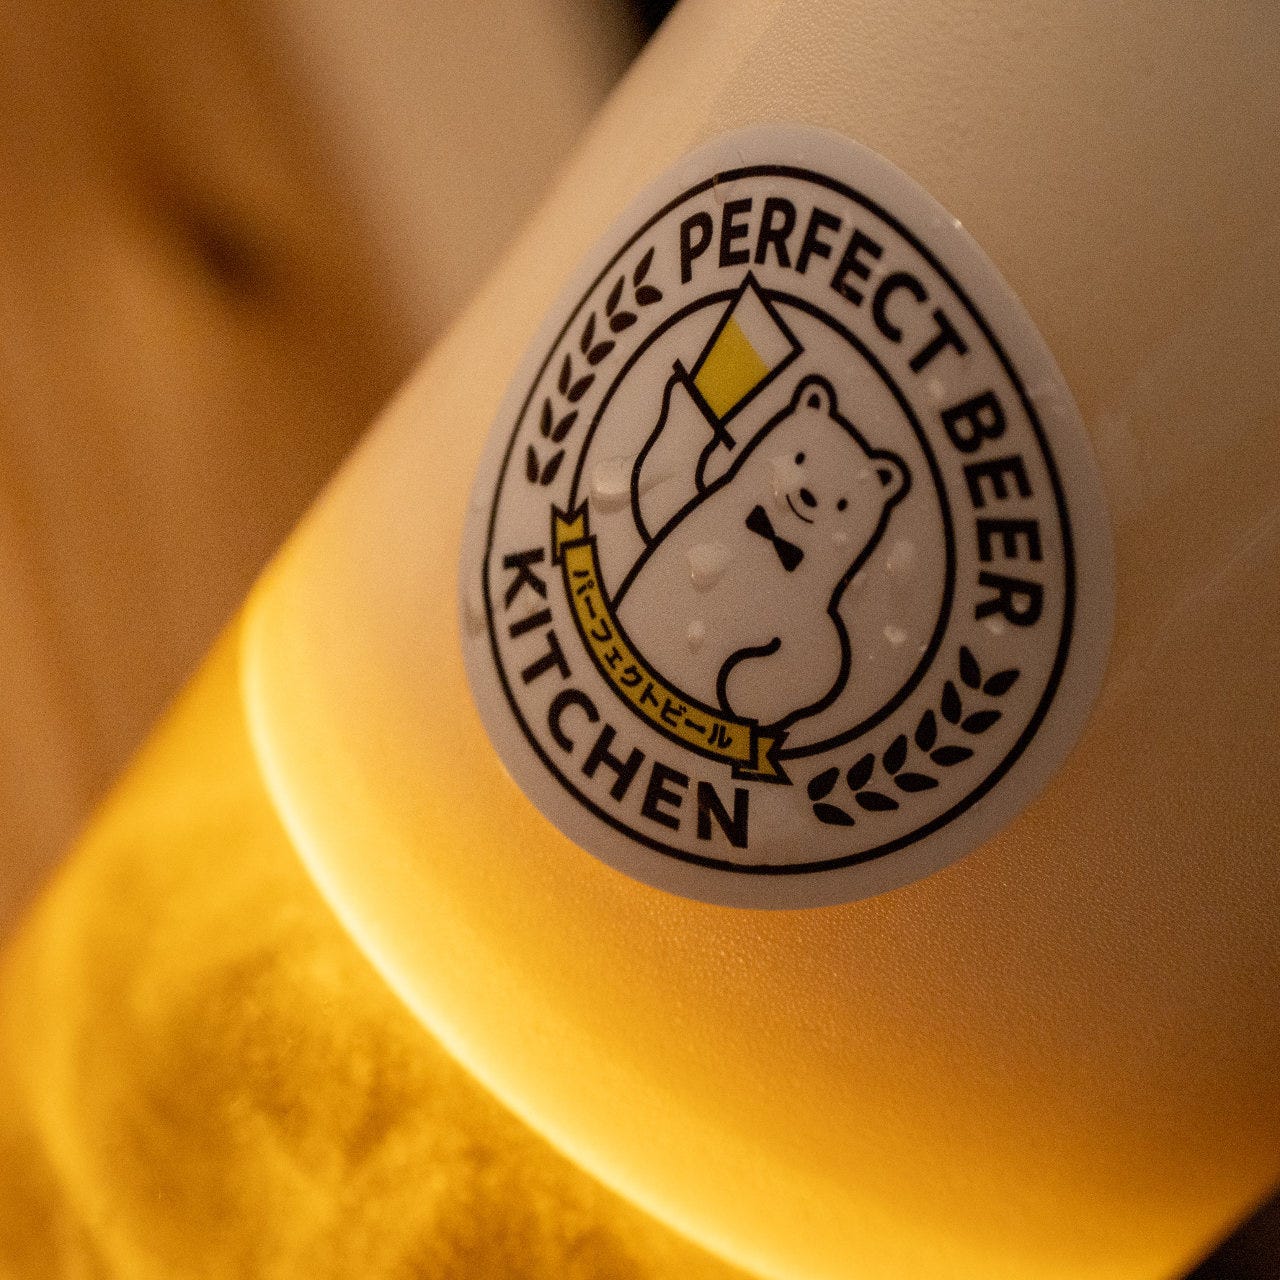 PERFECT BEER KITCHEN 名古屋栄